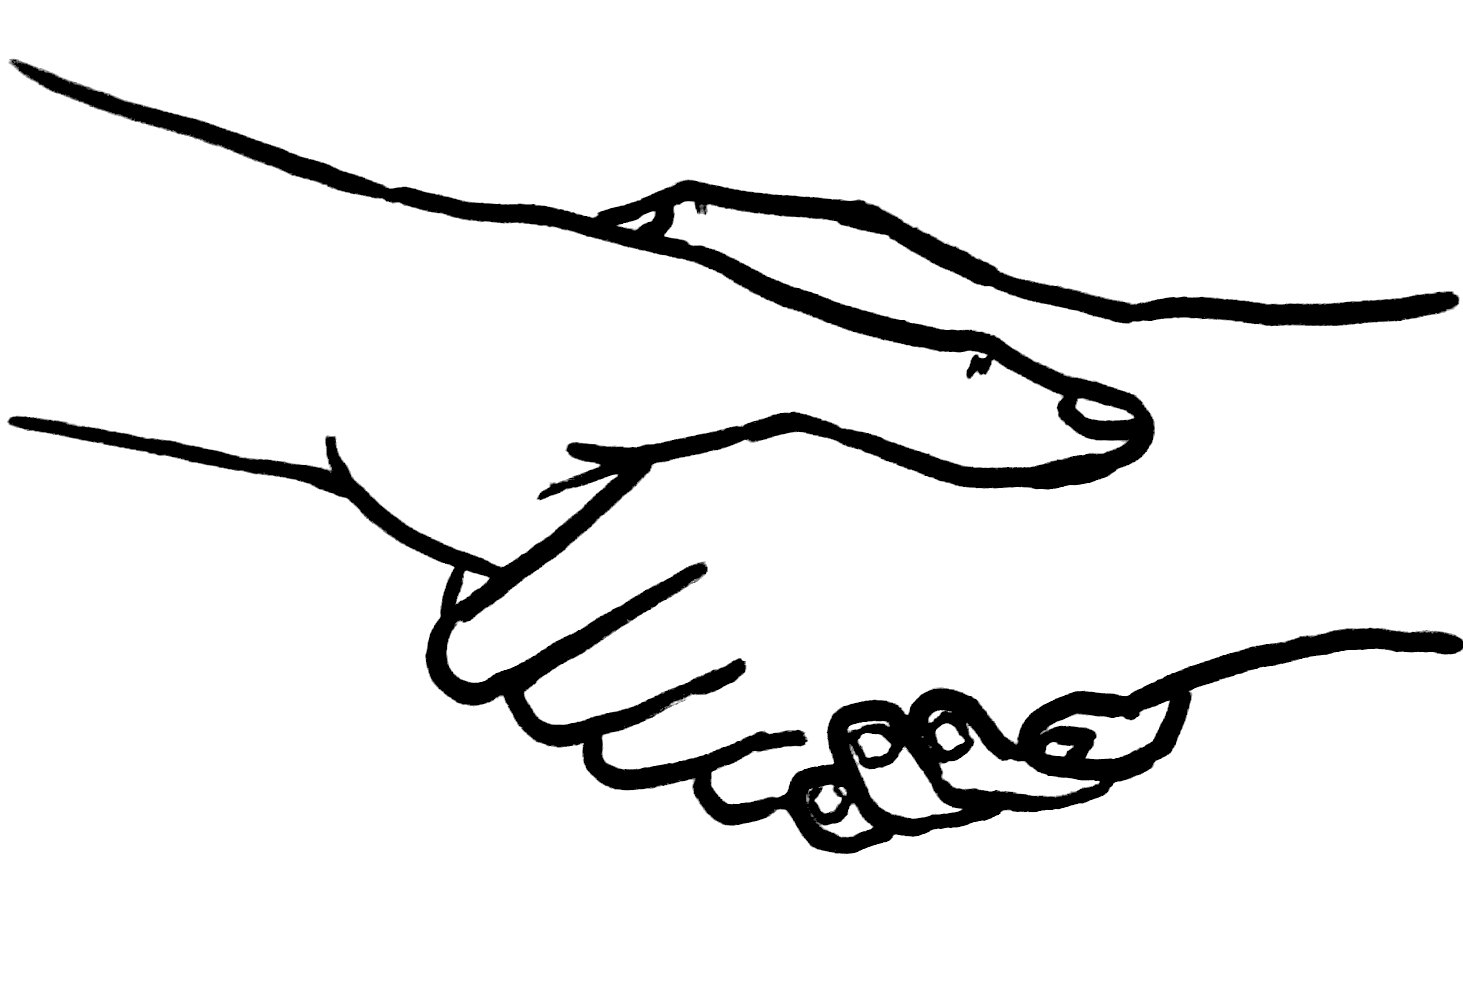 Drawings of shaking hands clipart